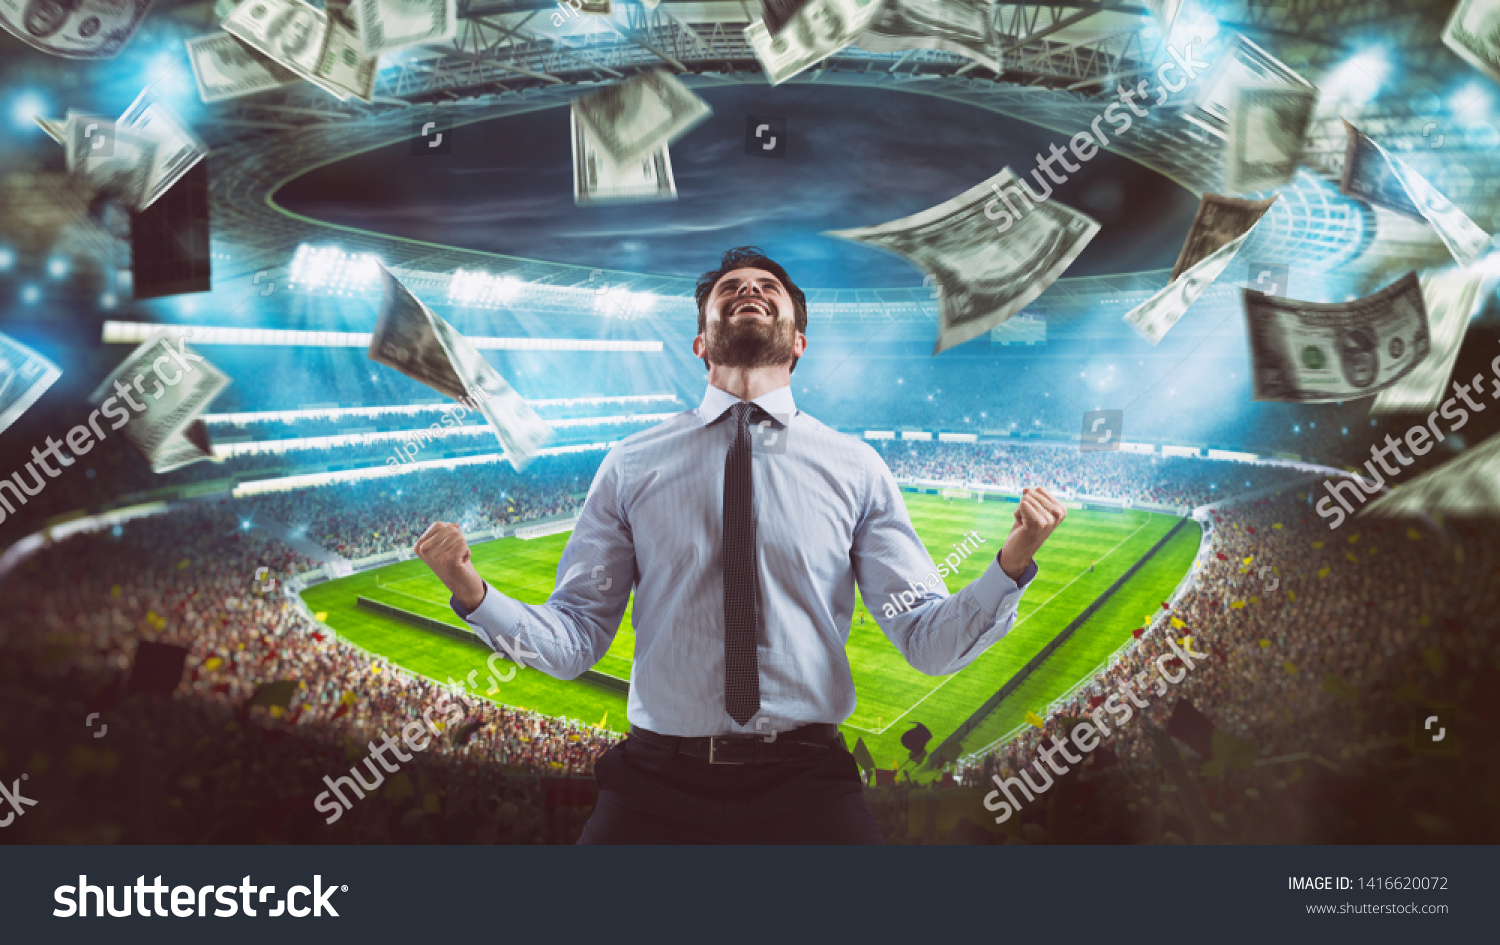 Man who rejoices at the stadium for winning a rich soccer bet #1416620072